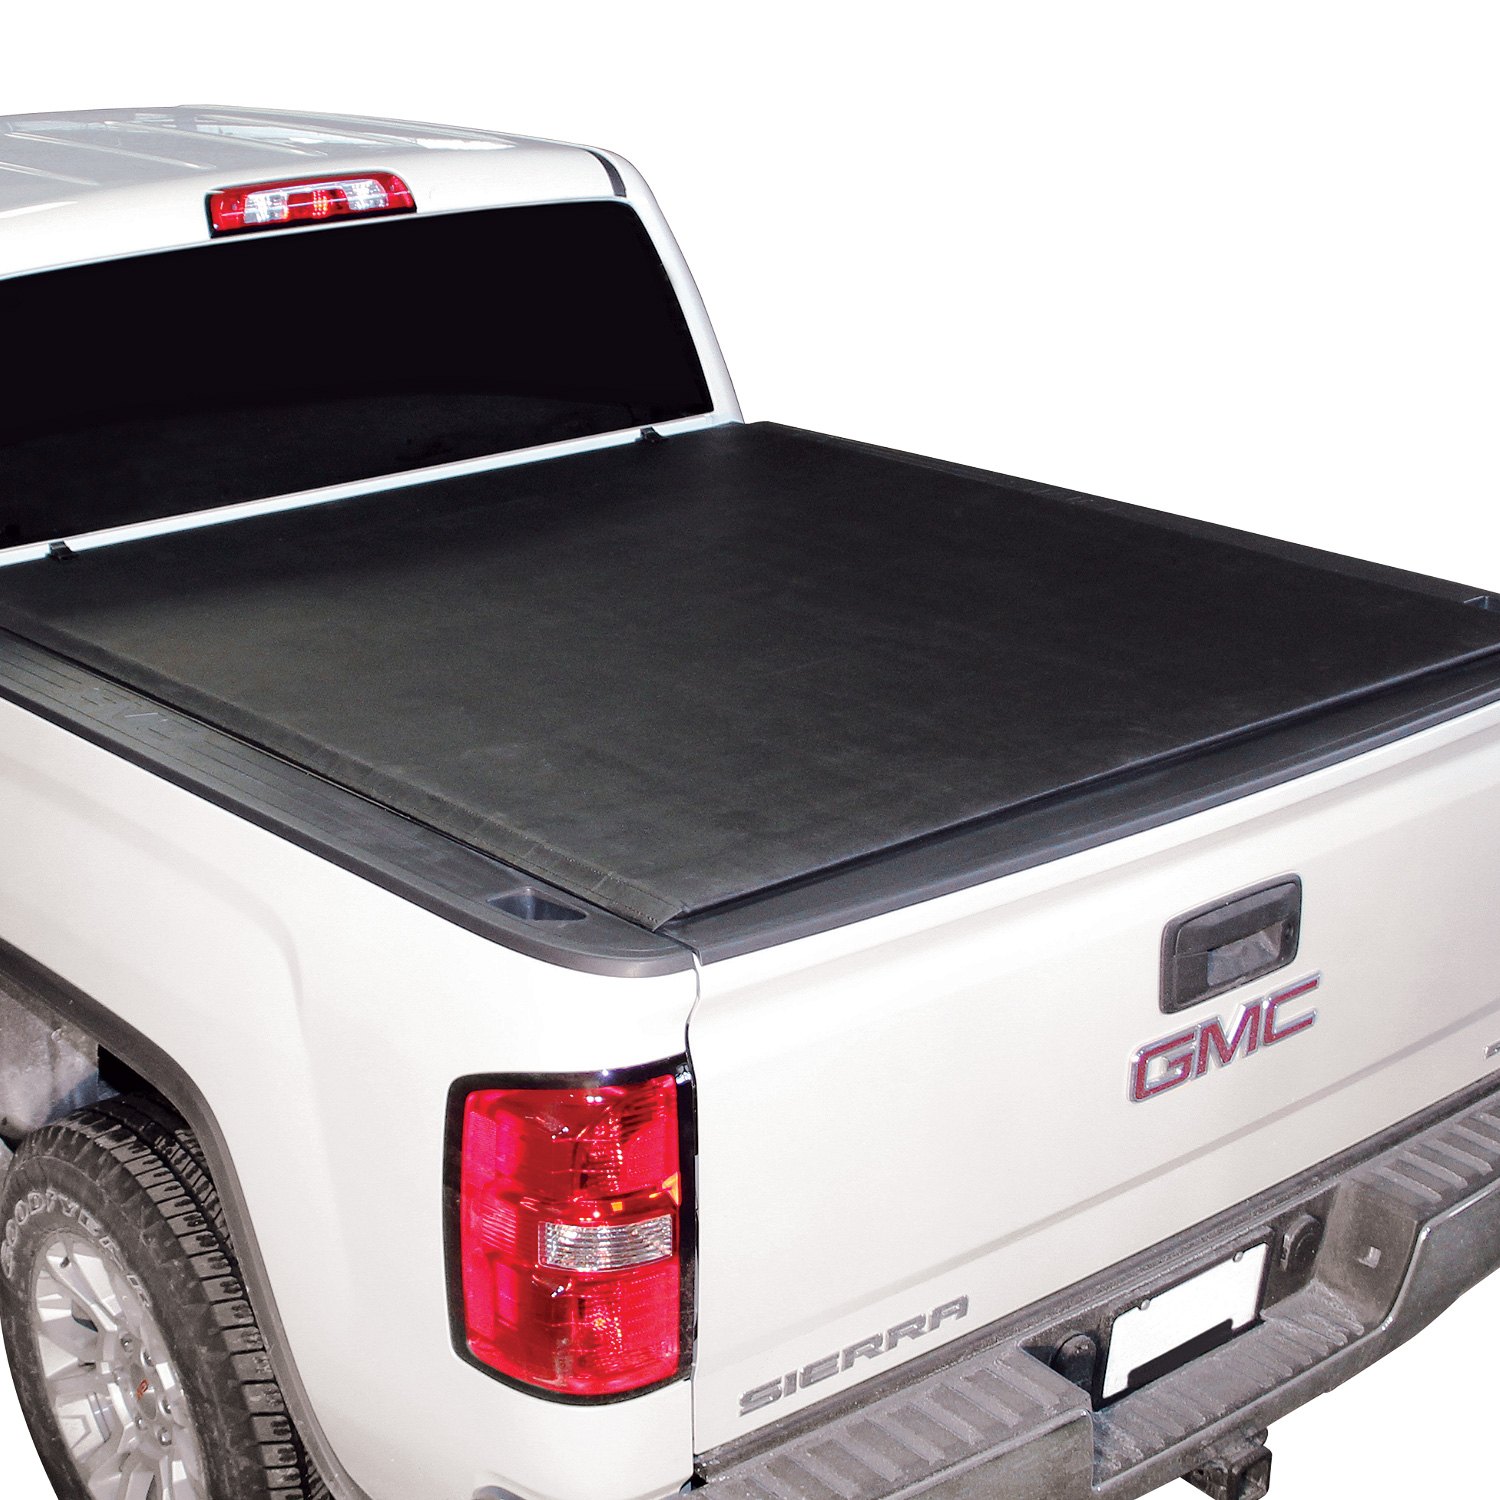 Rugged Liner® Toyota with Utility Track 20162017 Premium Roll Up Tonneau Cover